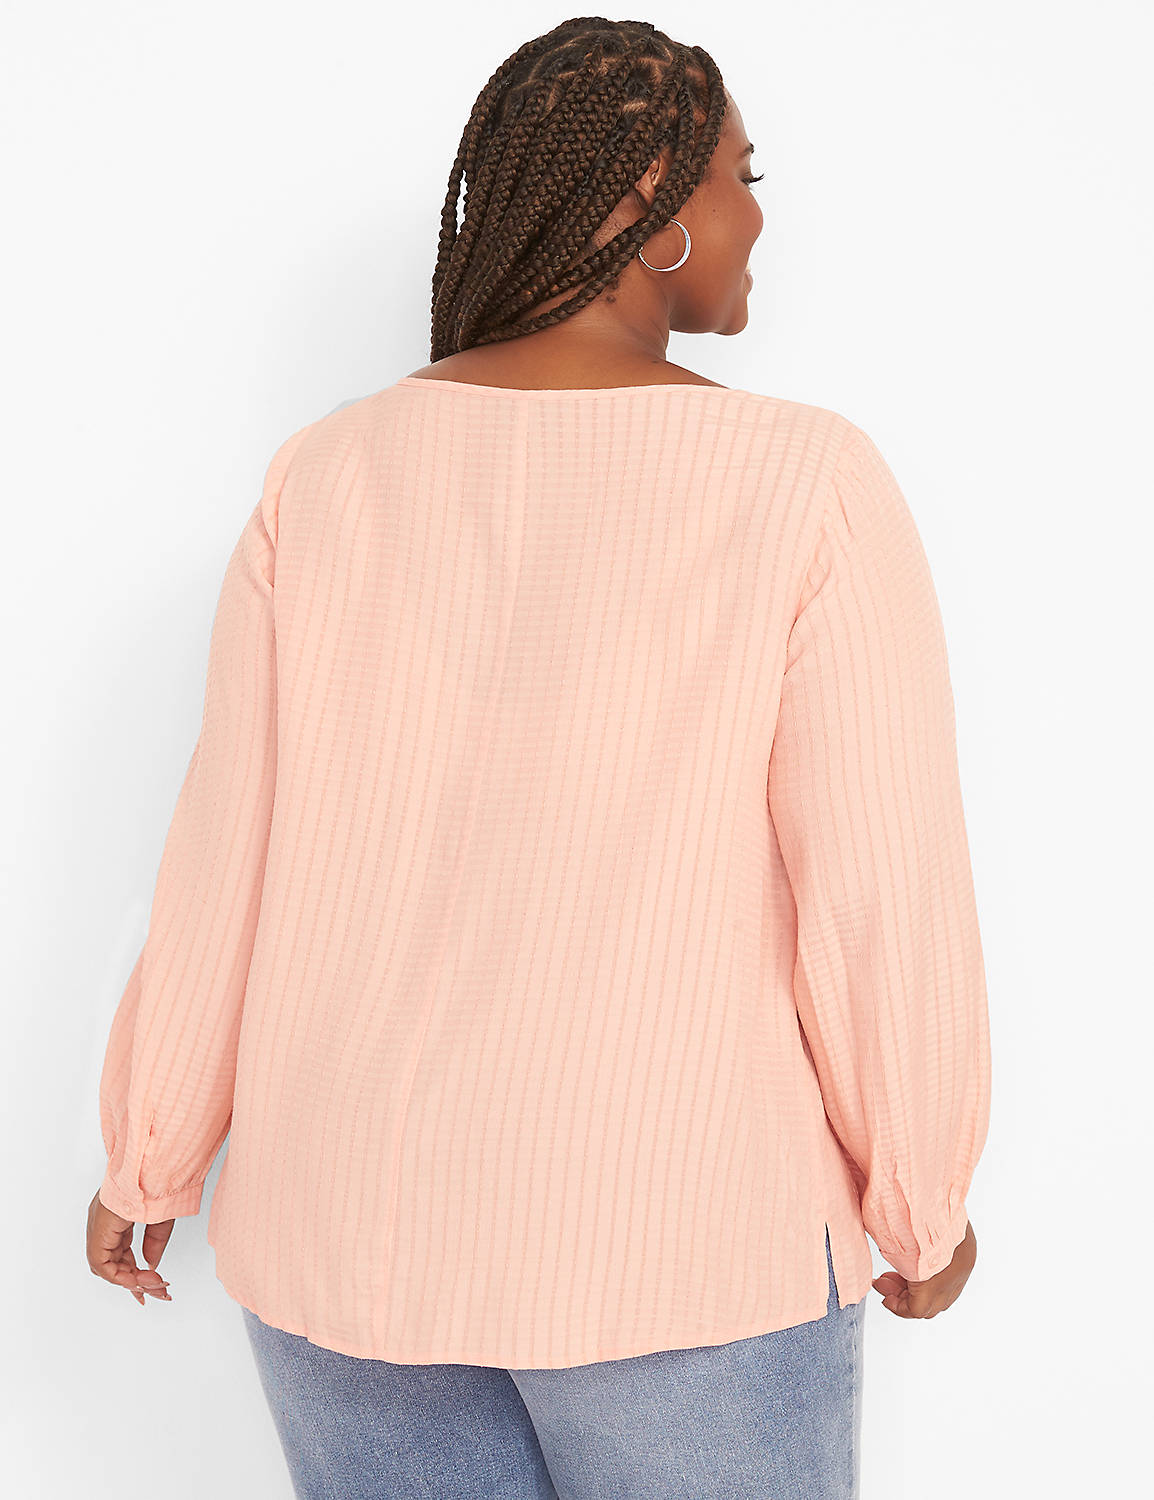 Long Sleeve Crew Neck Button Front Peplum 1124022:PANTONE Coral Pink:10/12 Product Image 2